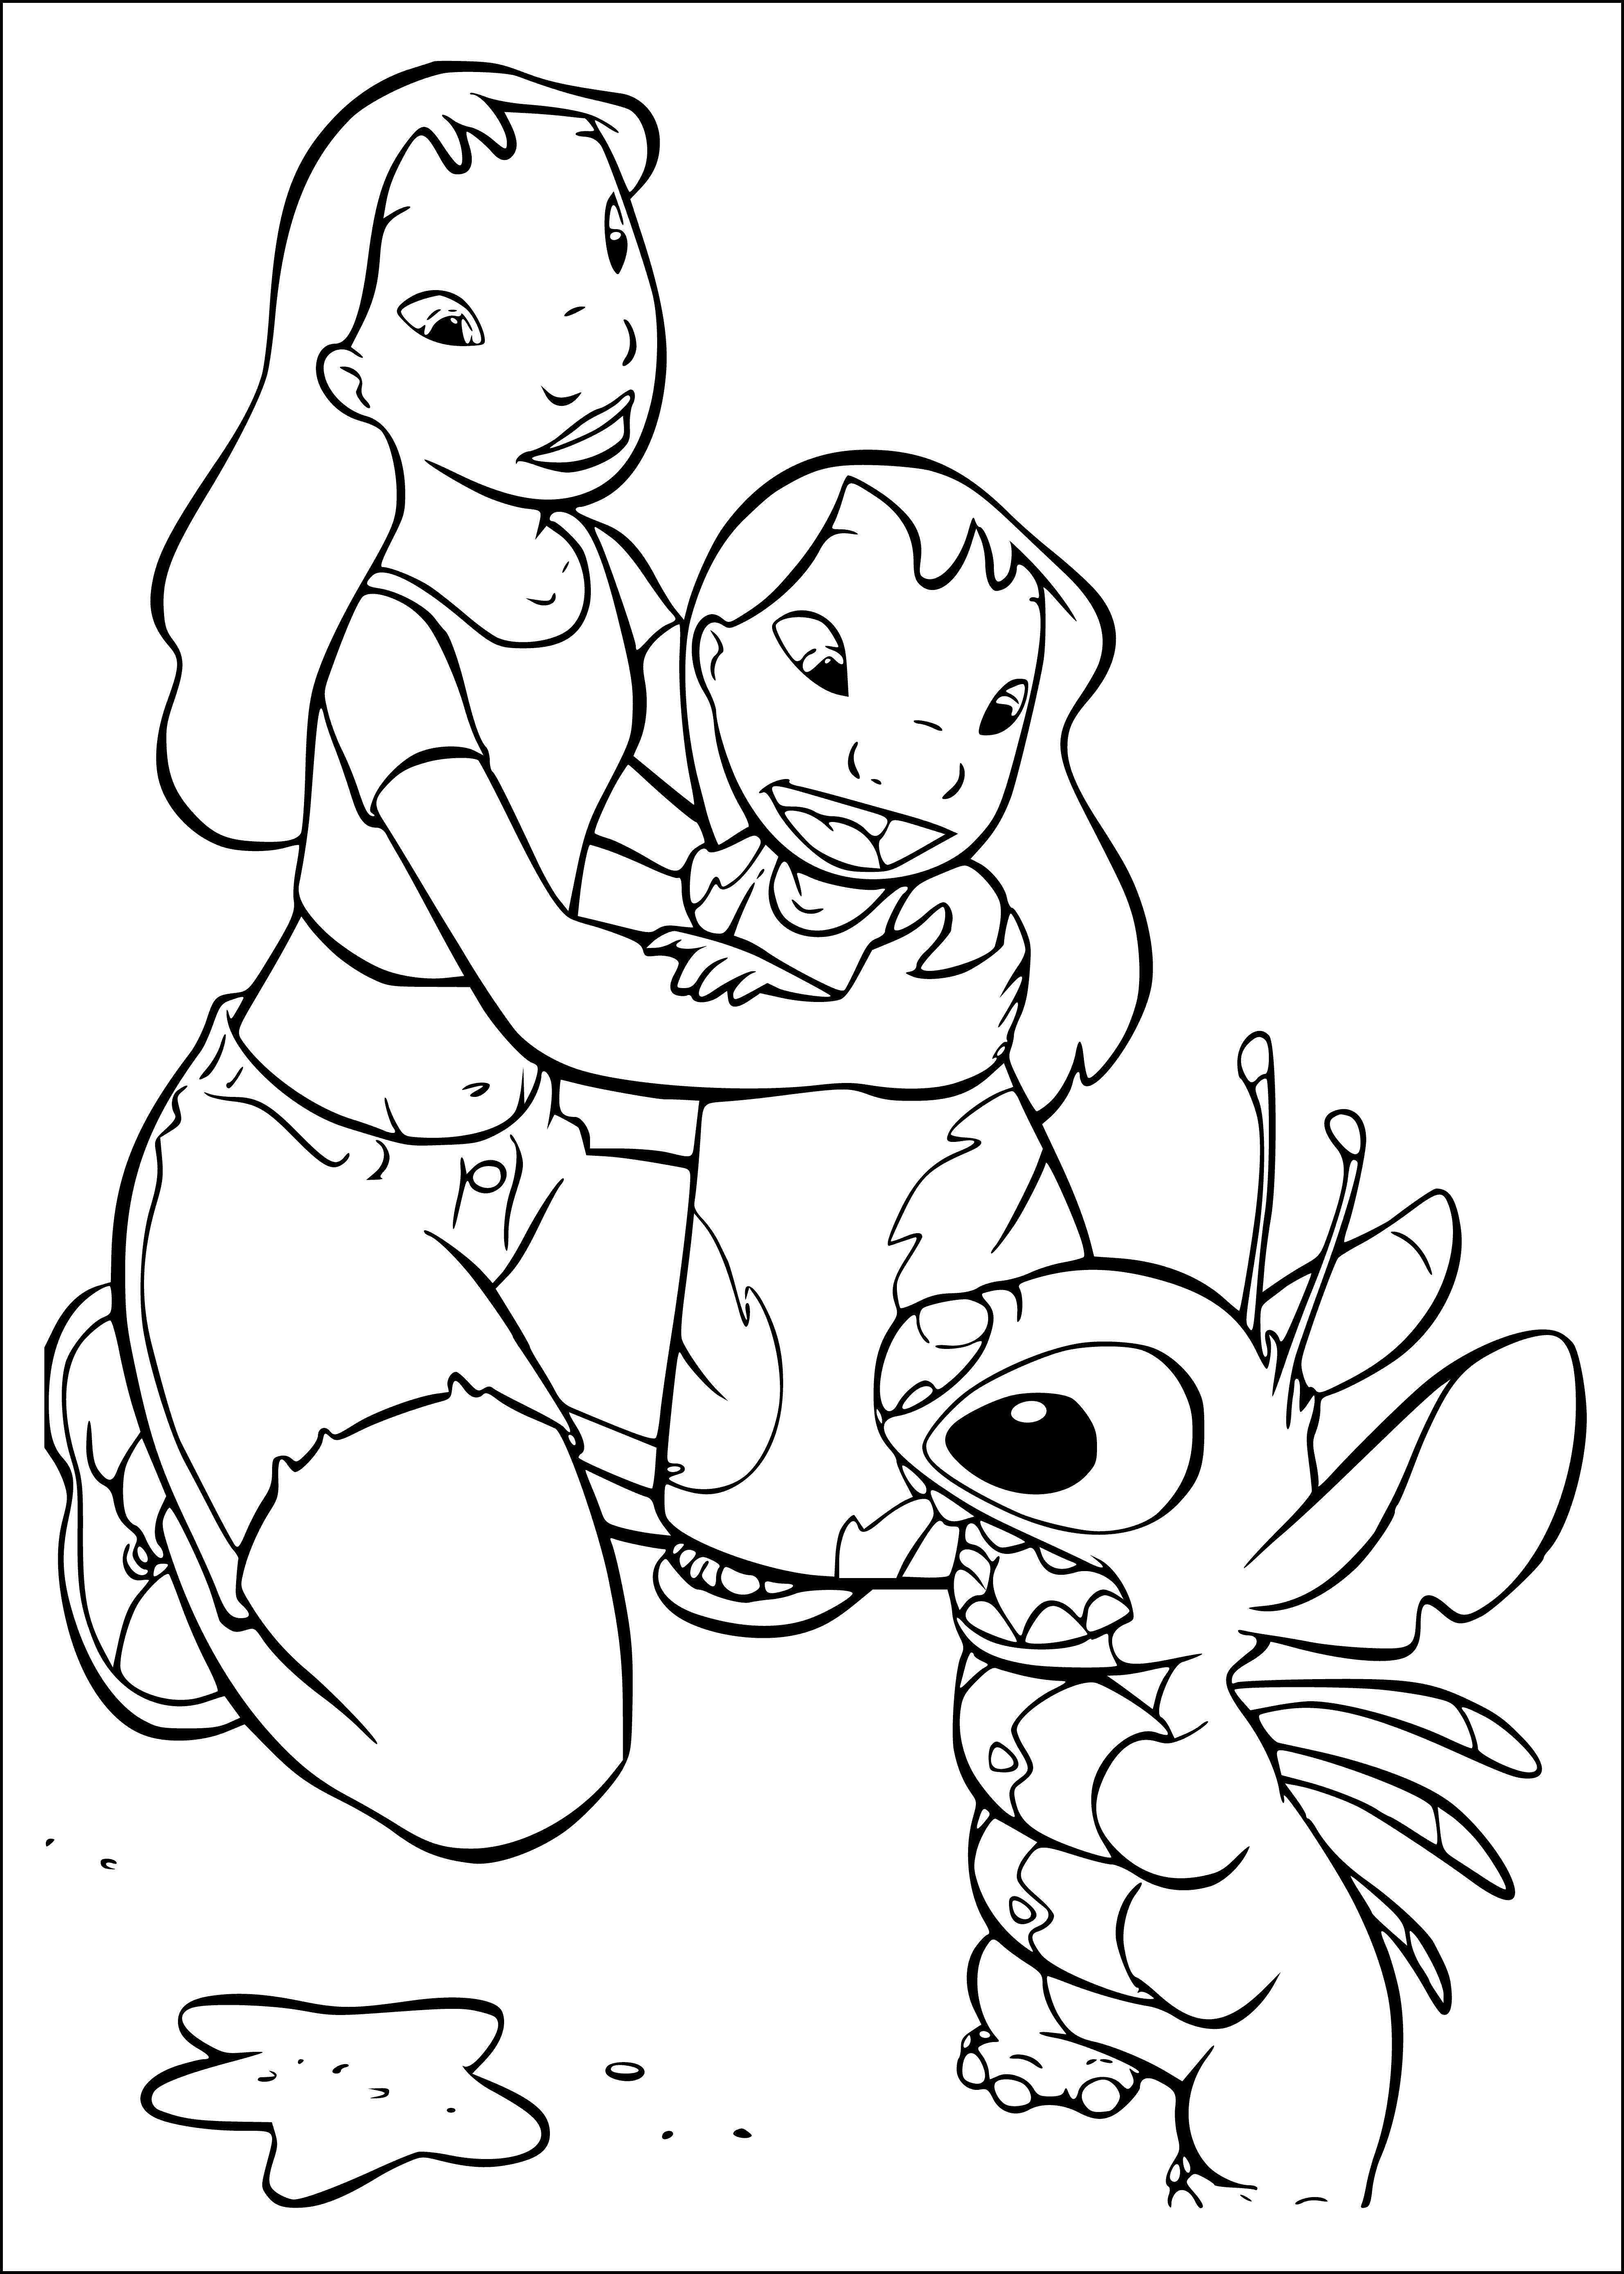 Stitch arrested coloring page